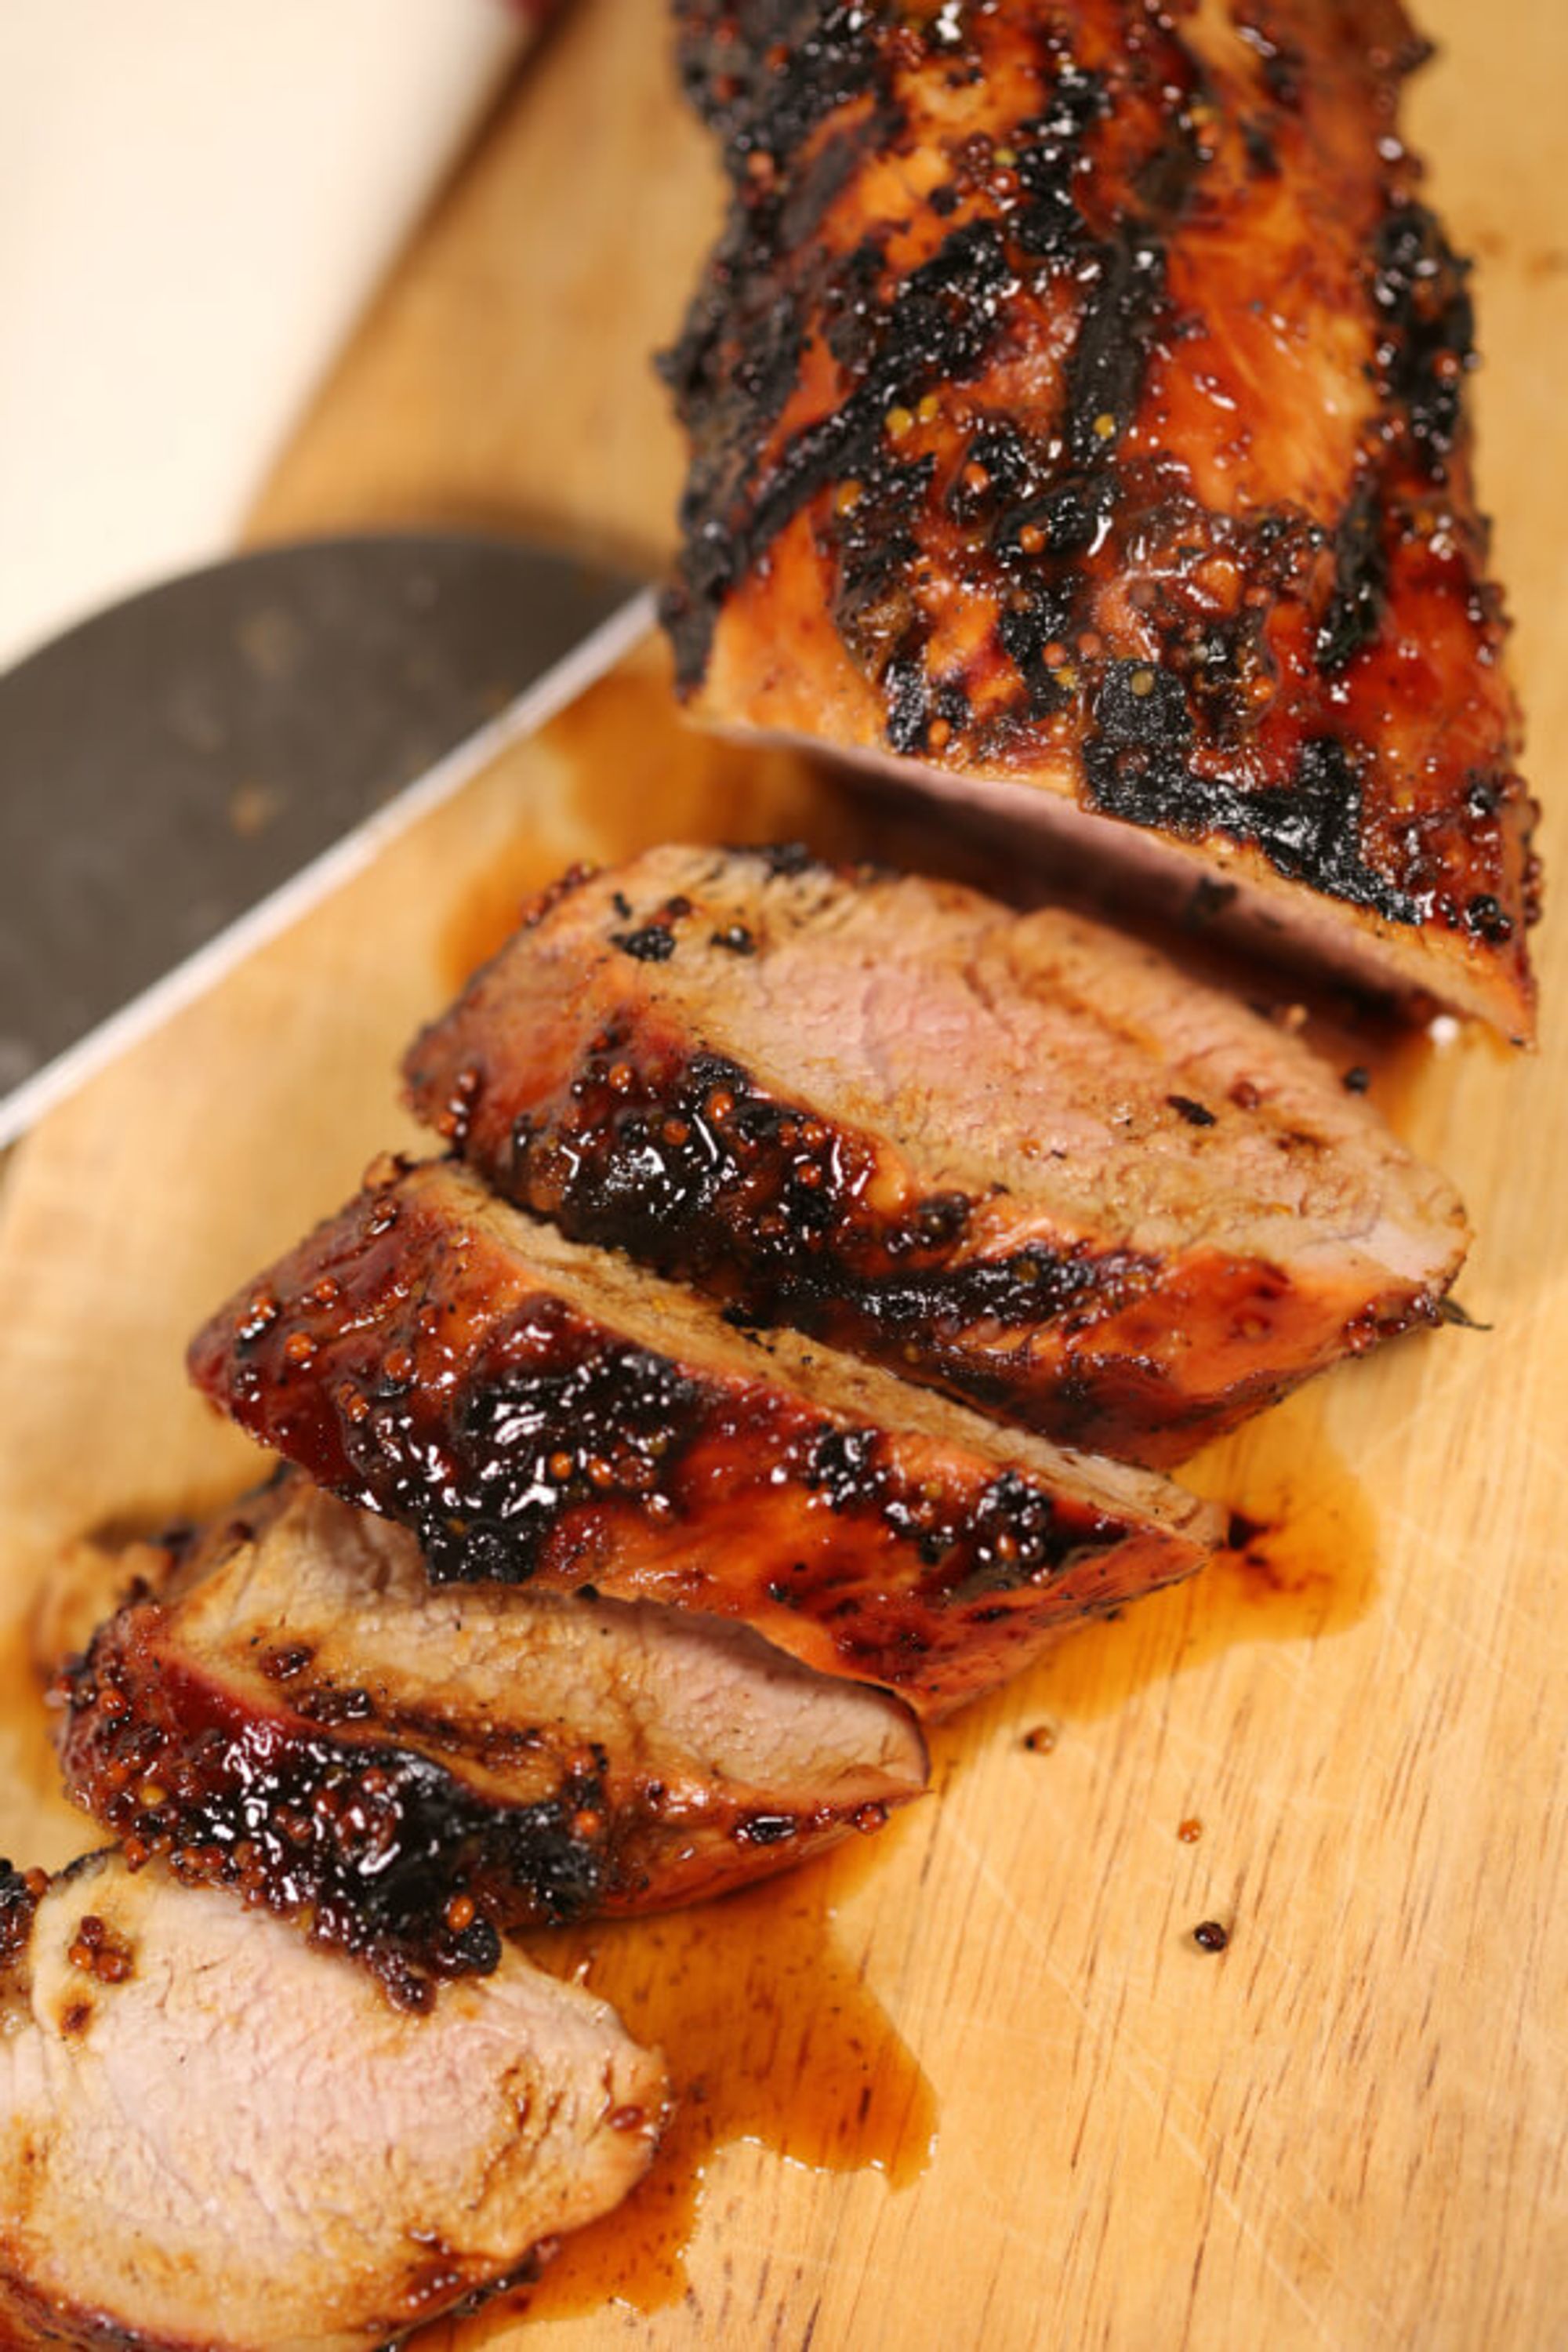 Best Grilled Pork Tenderloin | Quick and Easy Grilled Recipe - My ...